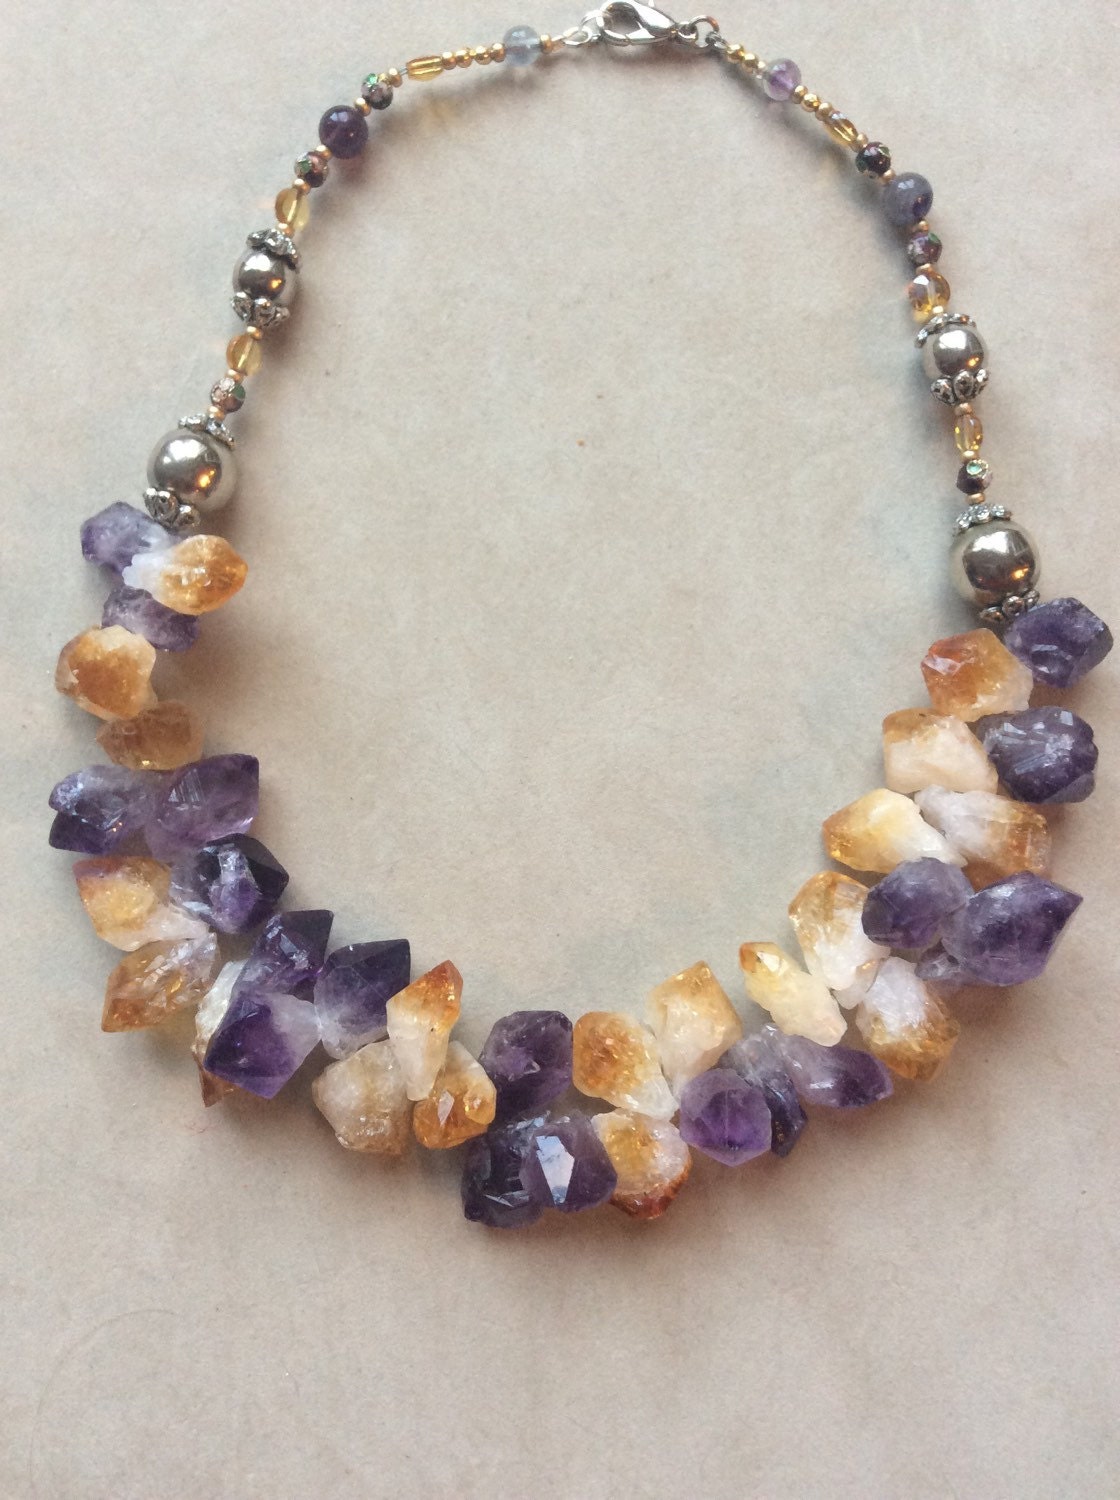 Raw Amethyst and Citrine in Quartz Necklace